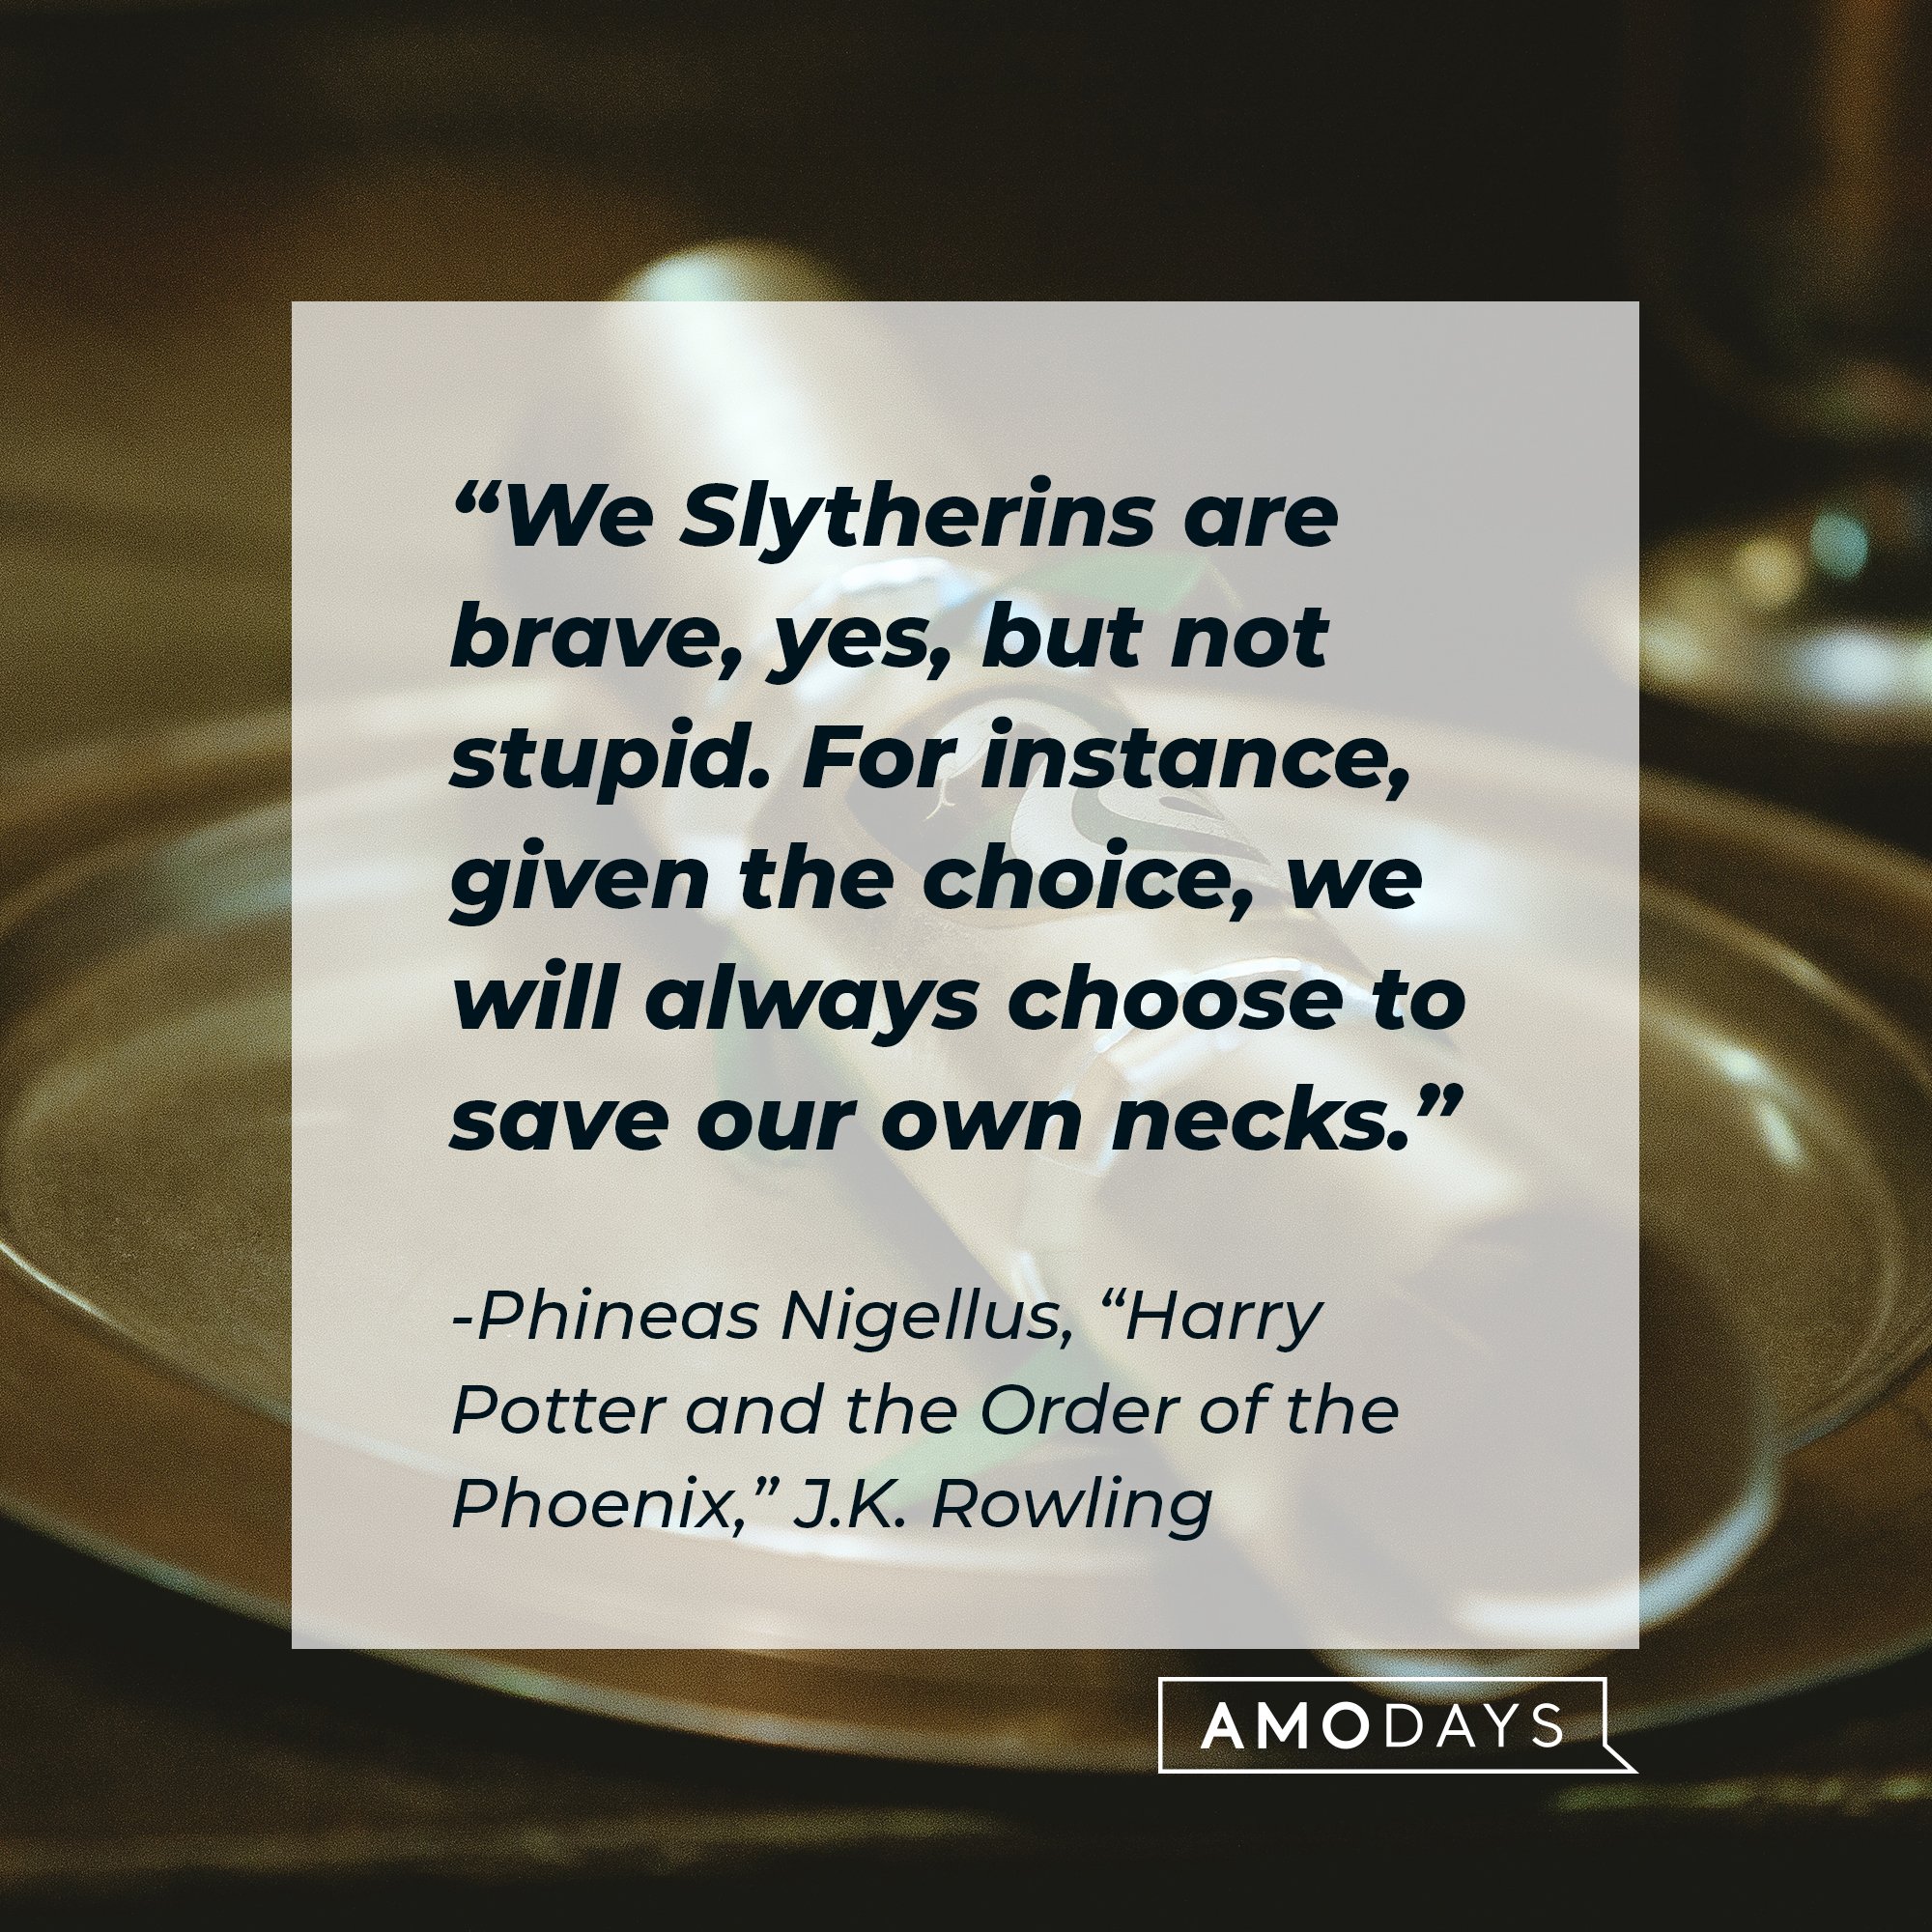 Phineas Nigellus’ quote from "Harry Potter and the Order of the Phoenix,":"We Slytherins are brave, yes, but not stupid. For instance, given the choice, we will always choose to save our own necks." | Image: AmoDays